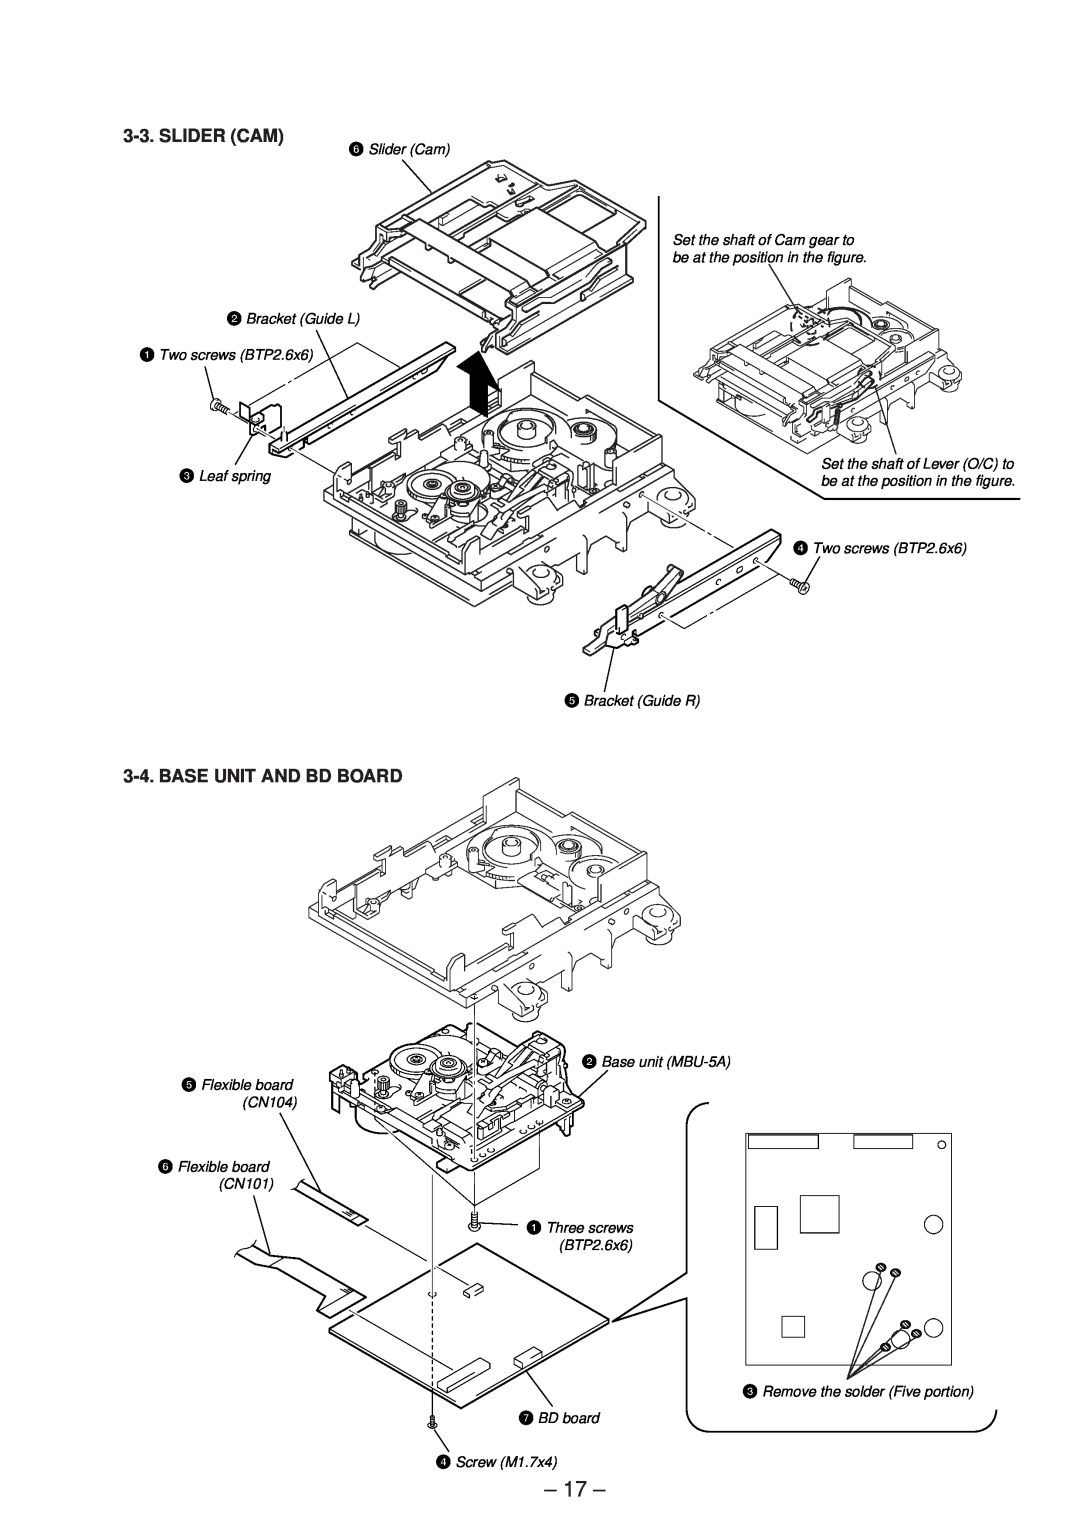 Sony MDS-SD1 service manual Slider Cam, Base Unit And Bd Board 